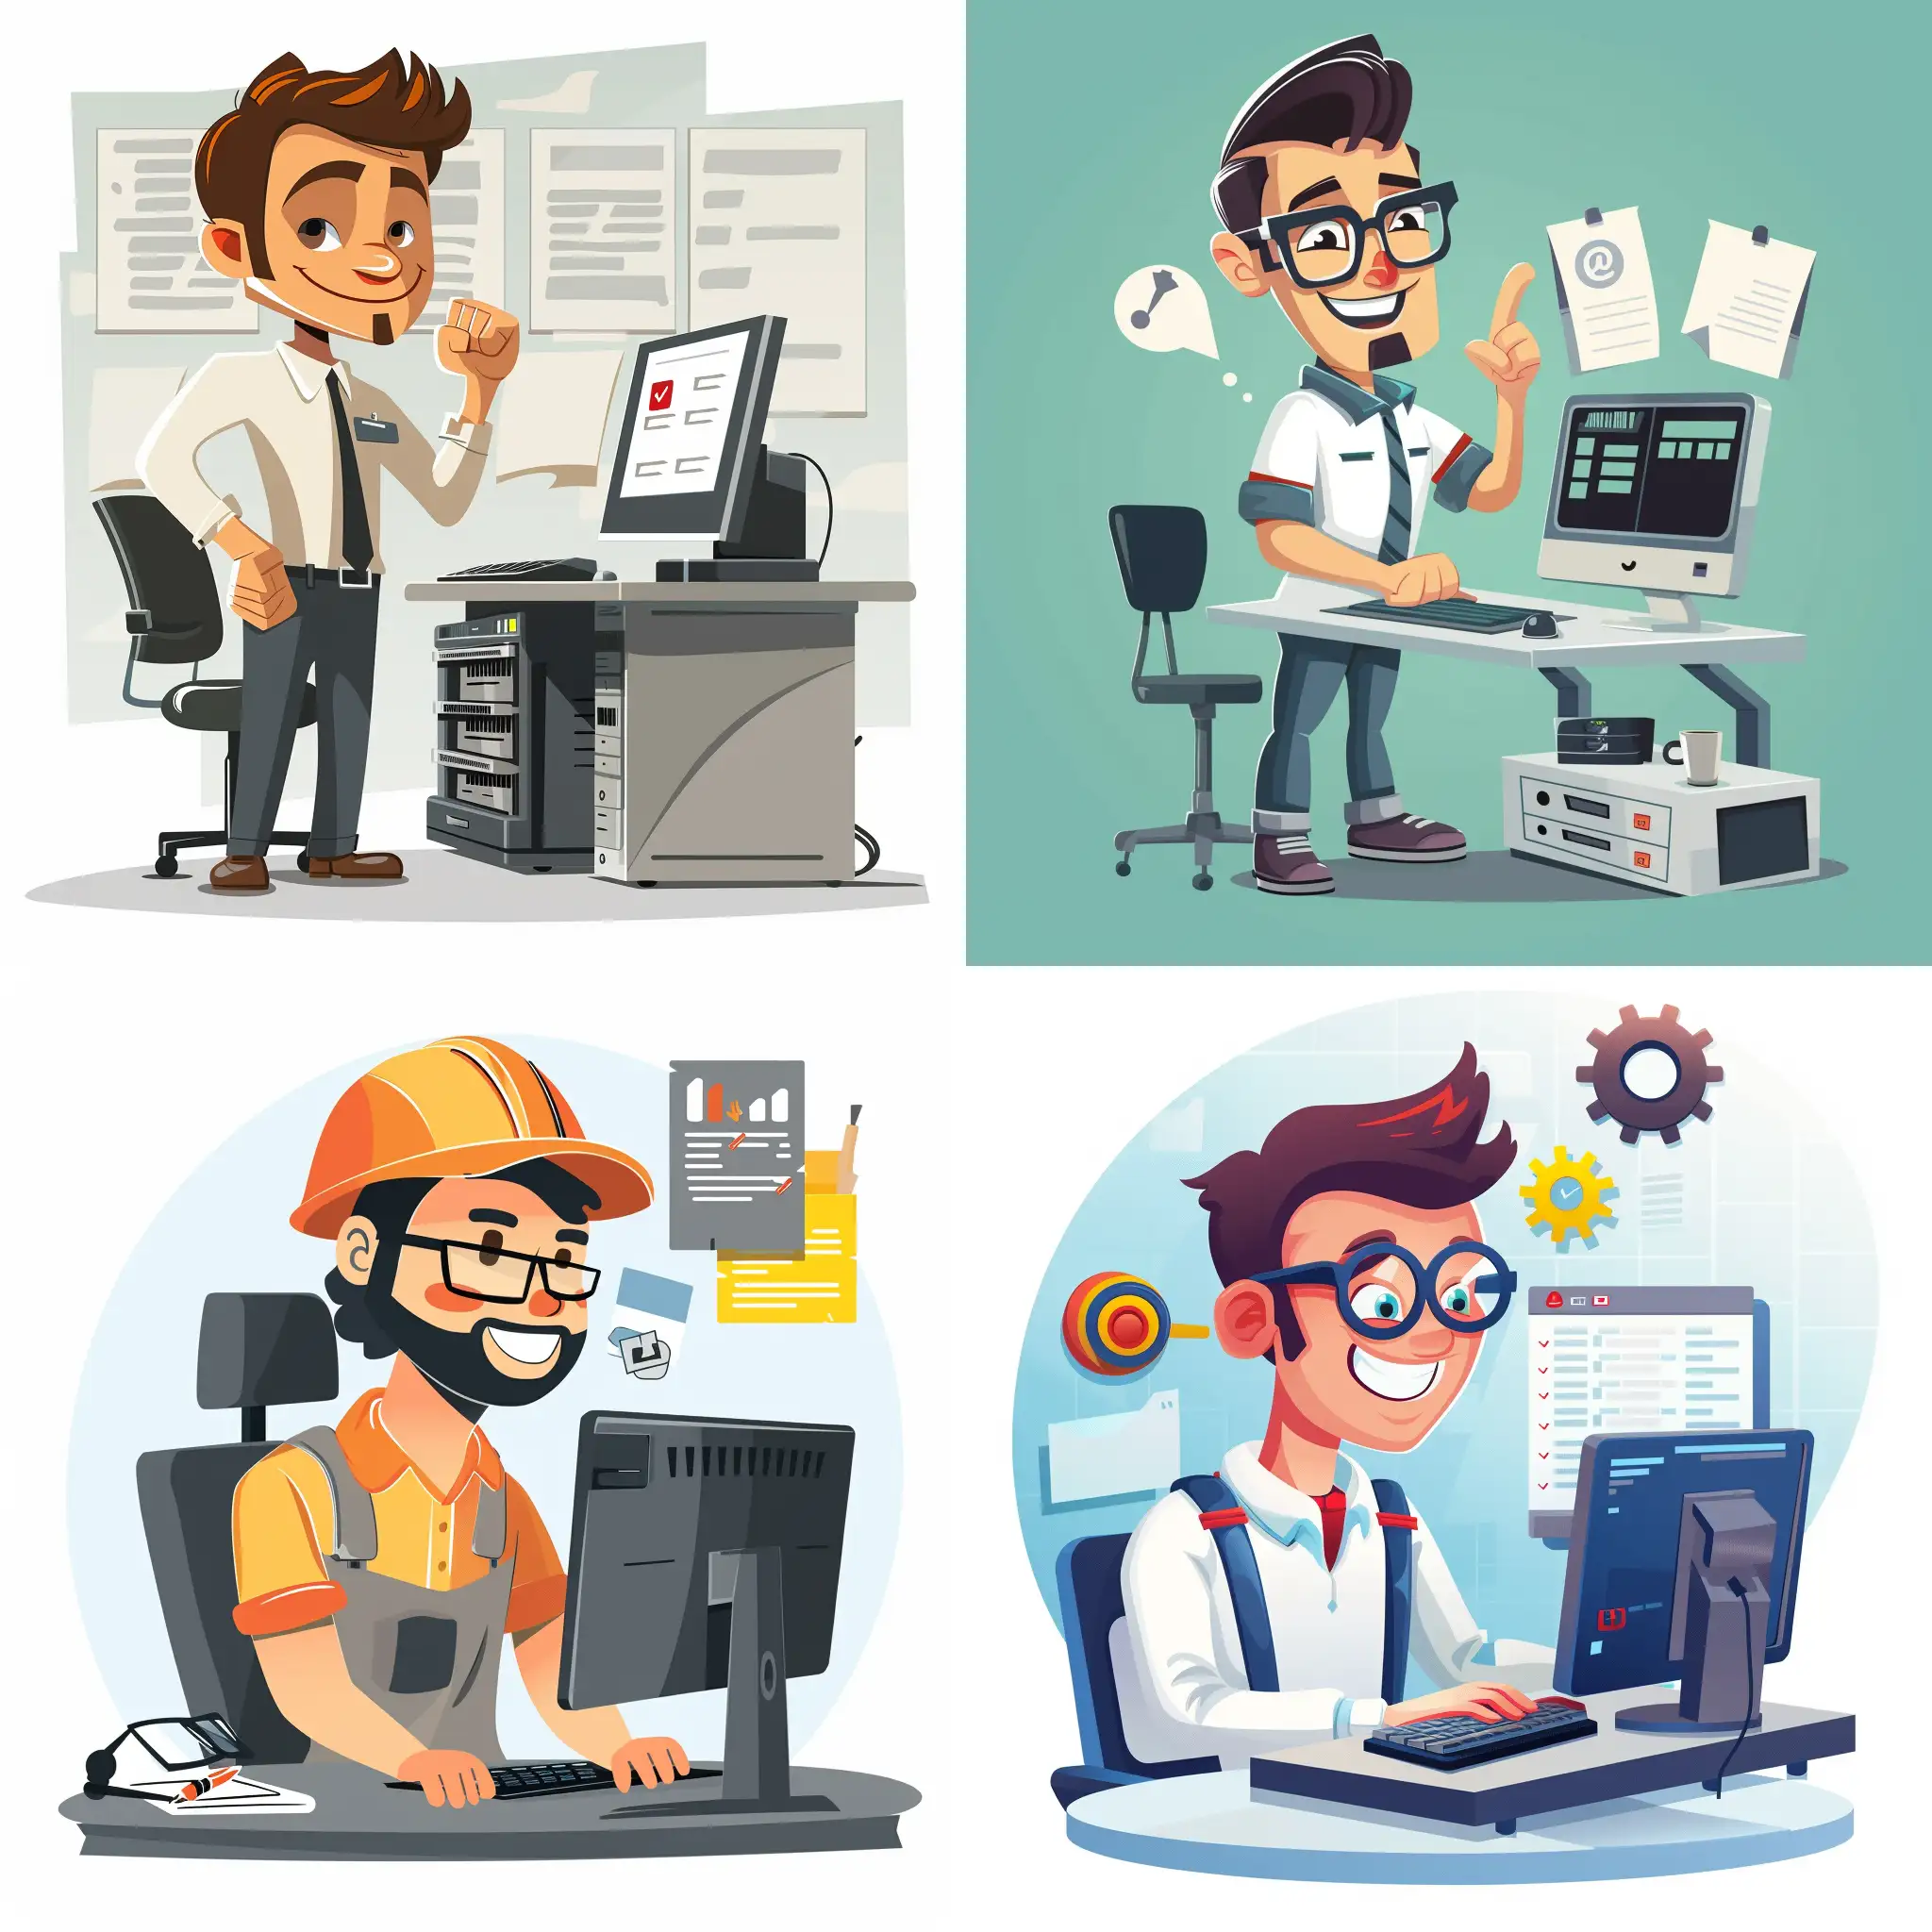 Cartoon computer technician showing qualities trust, quality, experience